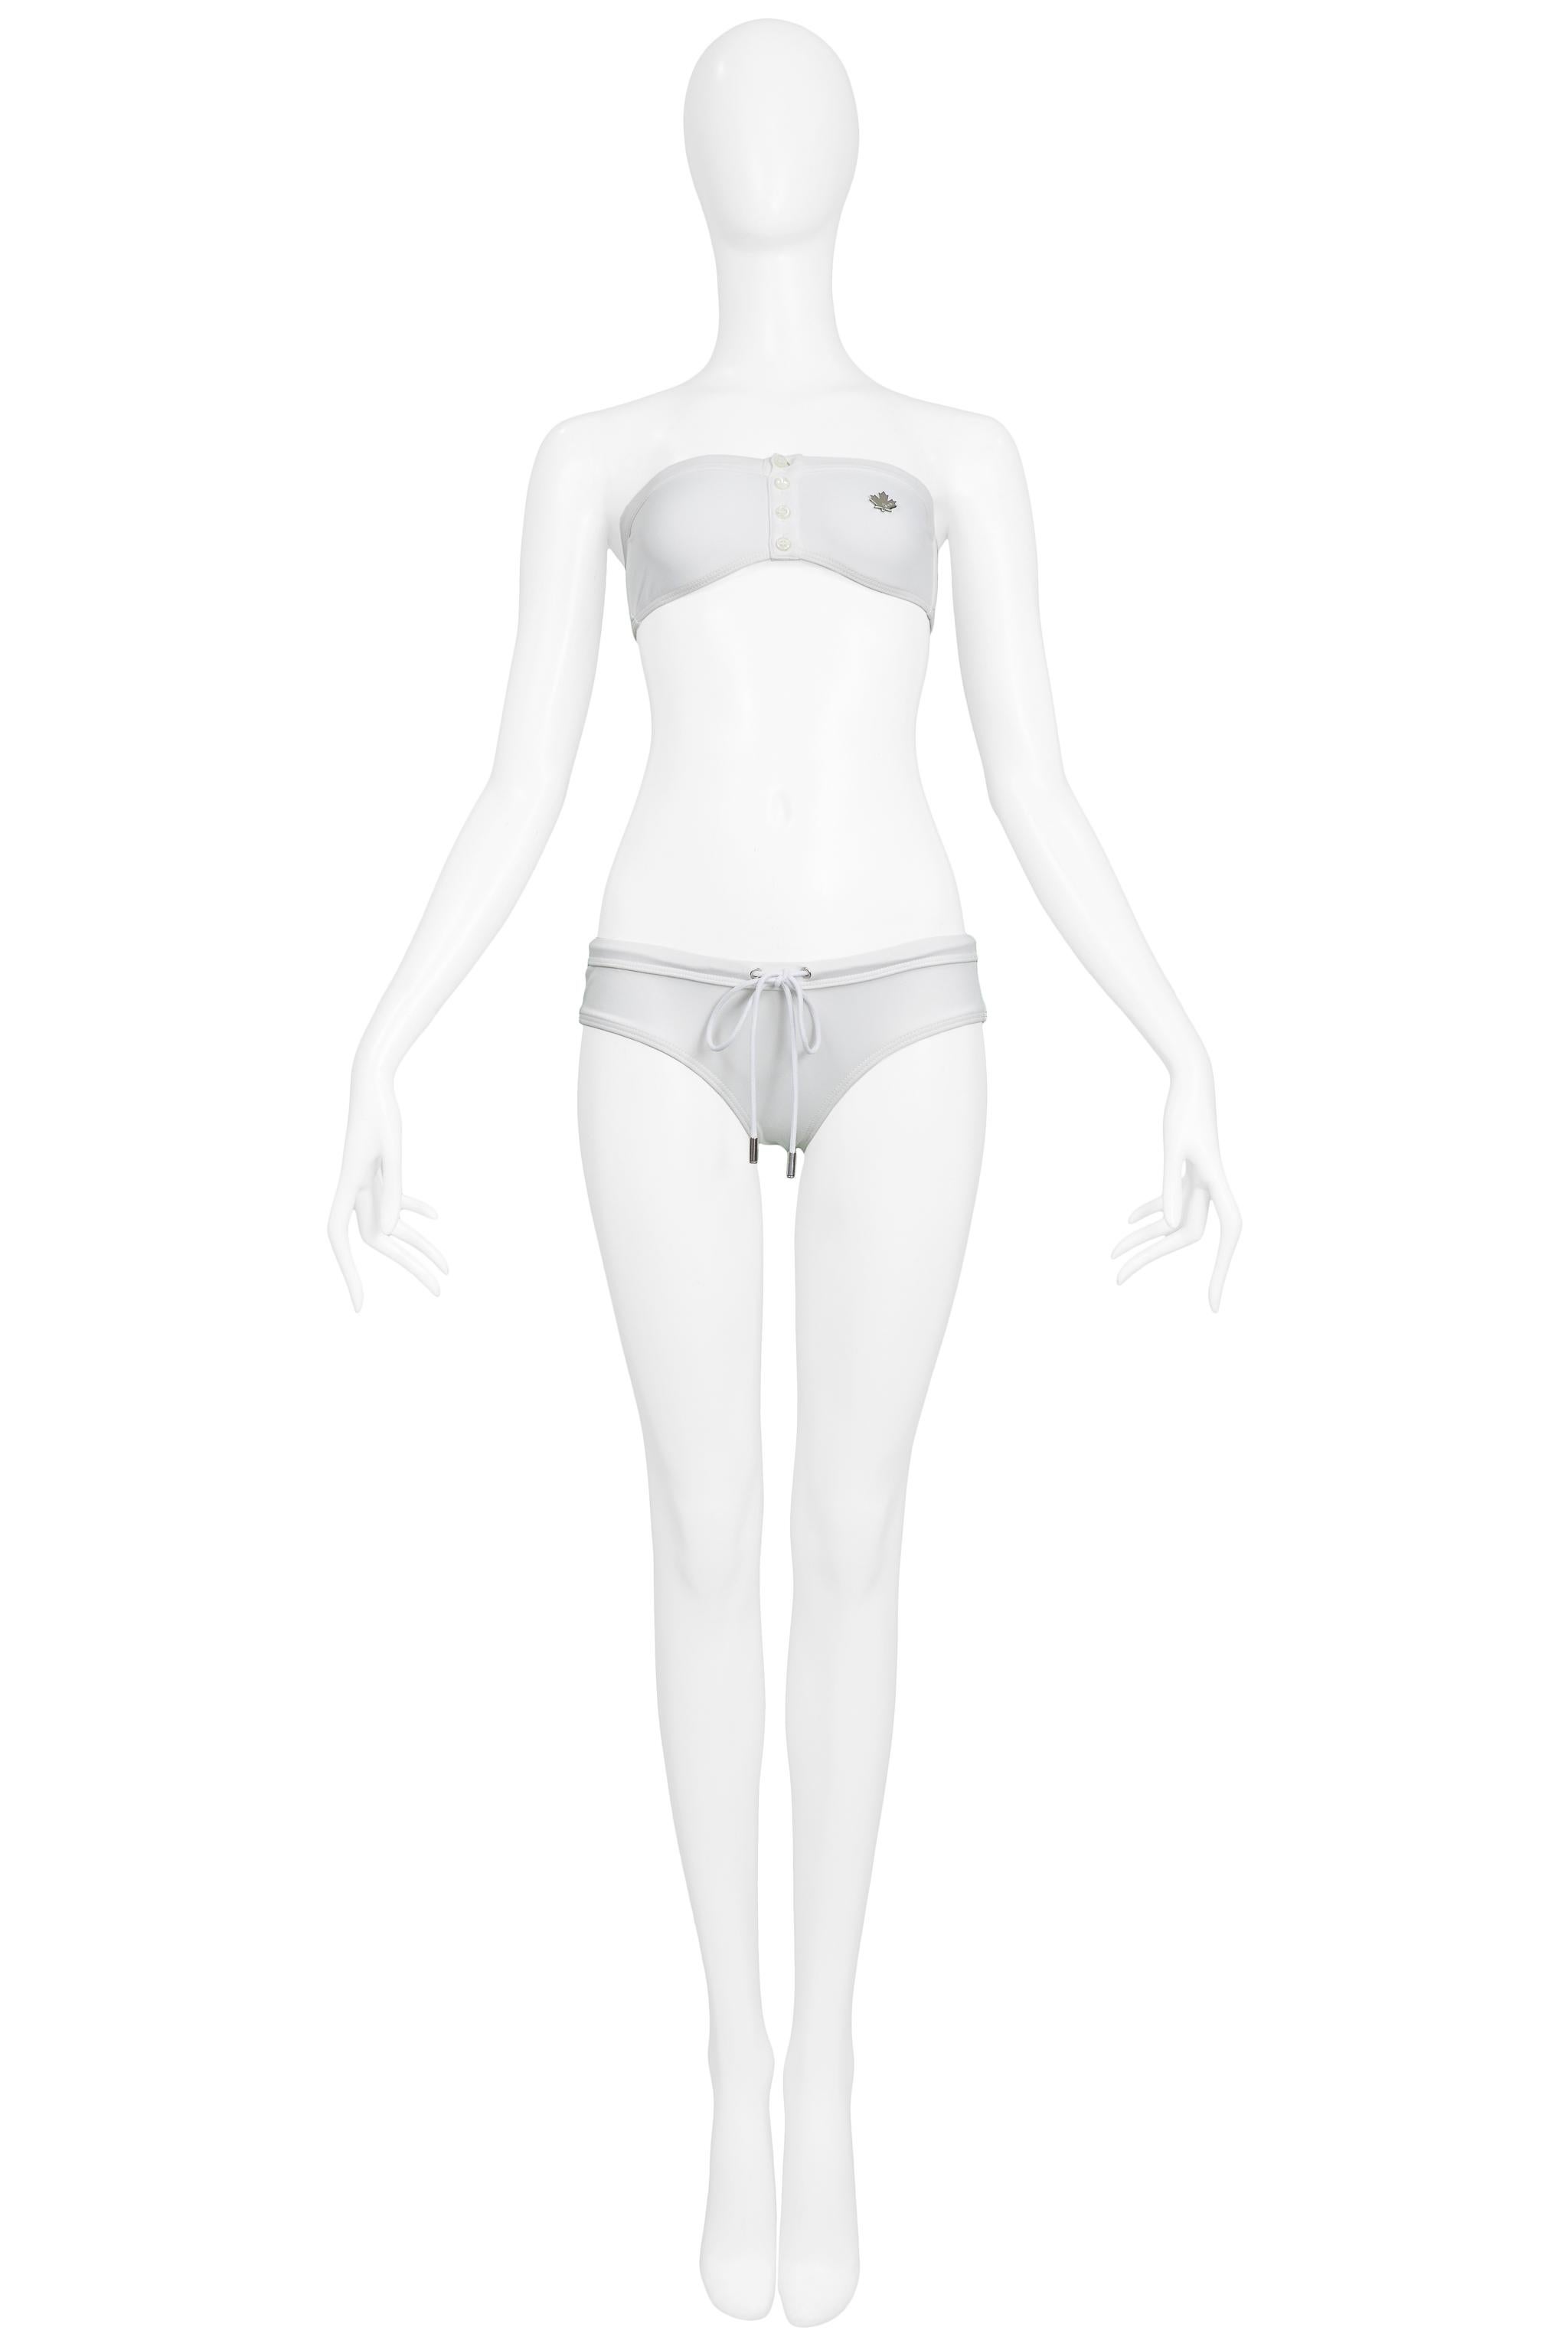 Resurrection Vintage is excited to present a vintage Dsquared white bikini swimsuit featuring a bandeau top, silver-tone leaf emblem, and bikini bottoms with drawstring. 

Dsquared
Size: M
Excellent Vintage Condition 
Authenticity Guaranteed 